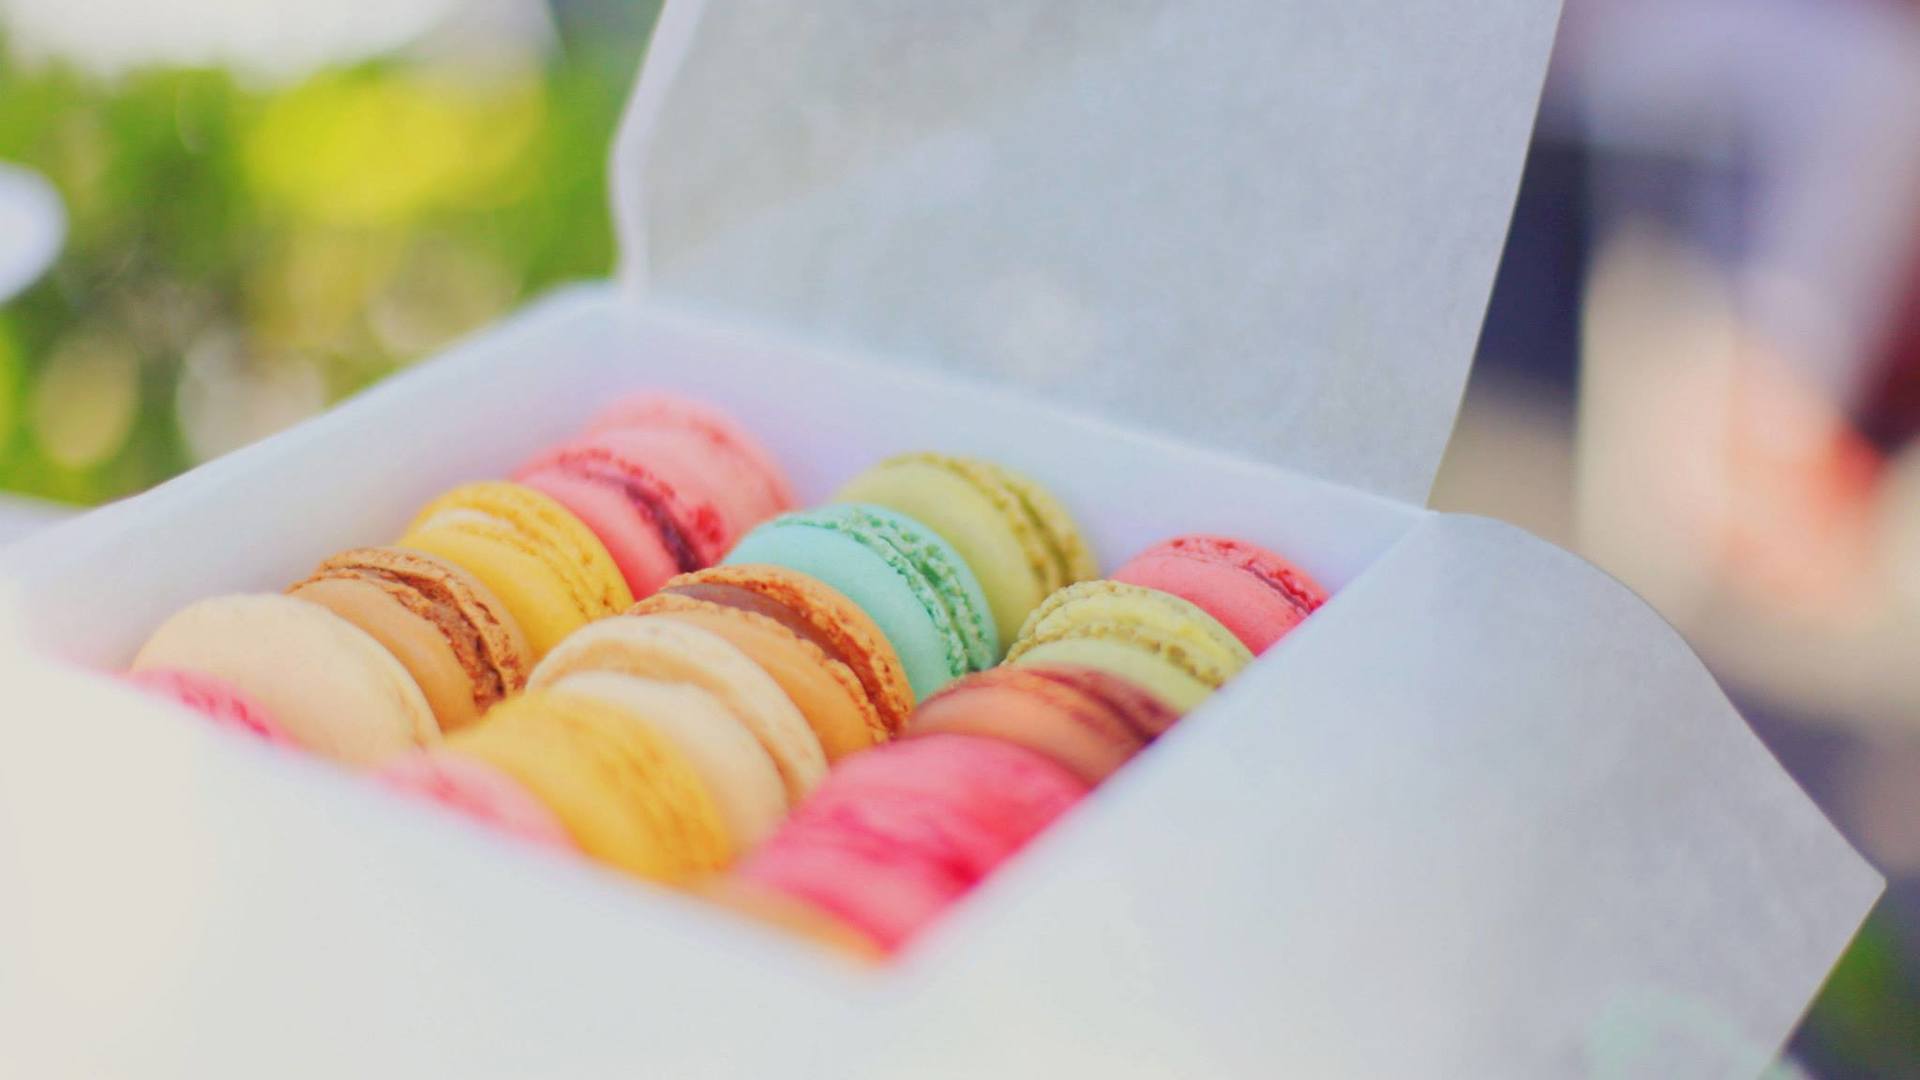 🎂 Don’t Be Shocked When We Guess Your Age and Birth Month from the Desserts You Like Macarons